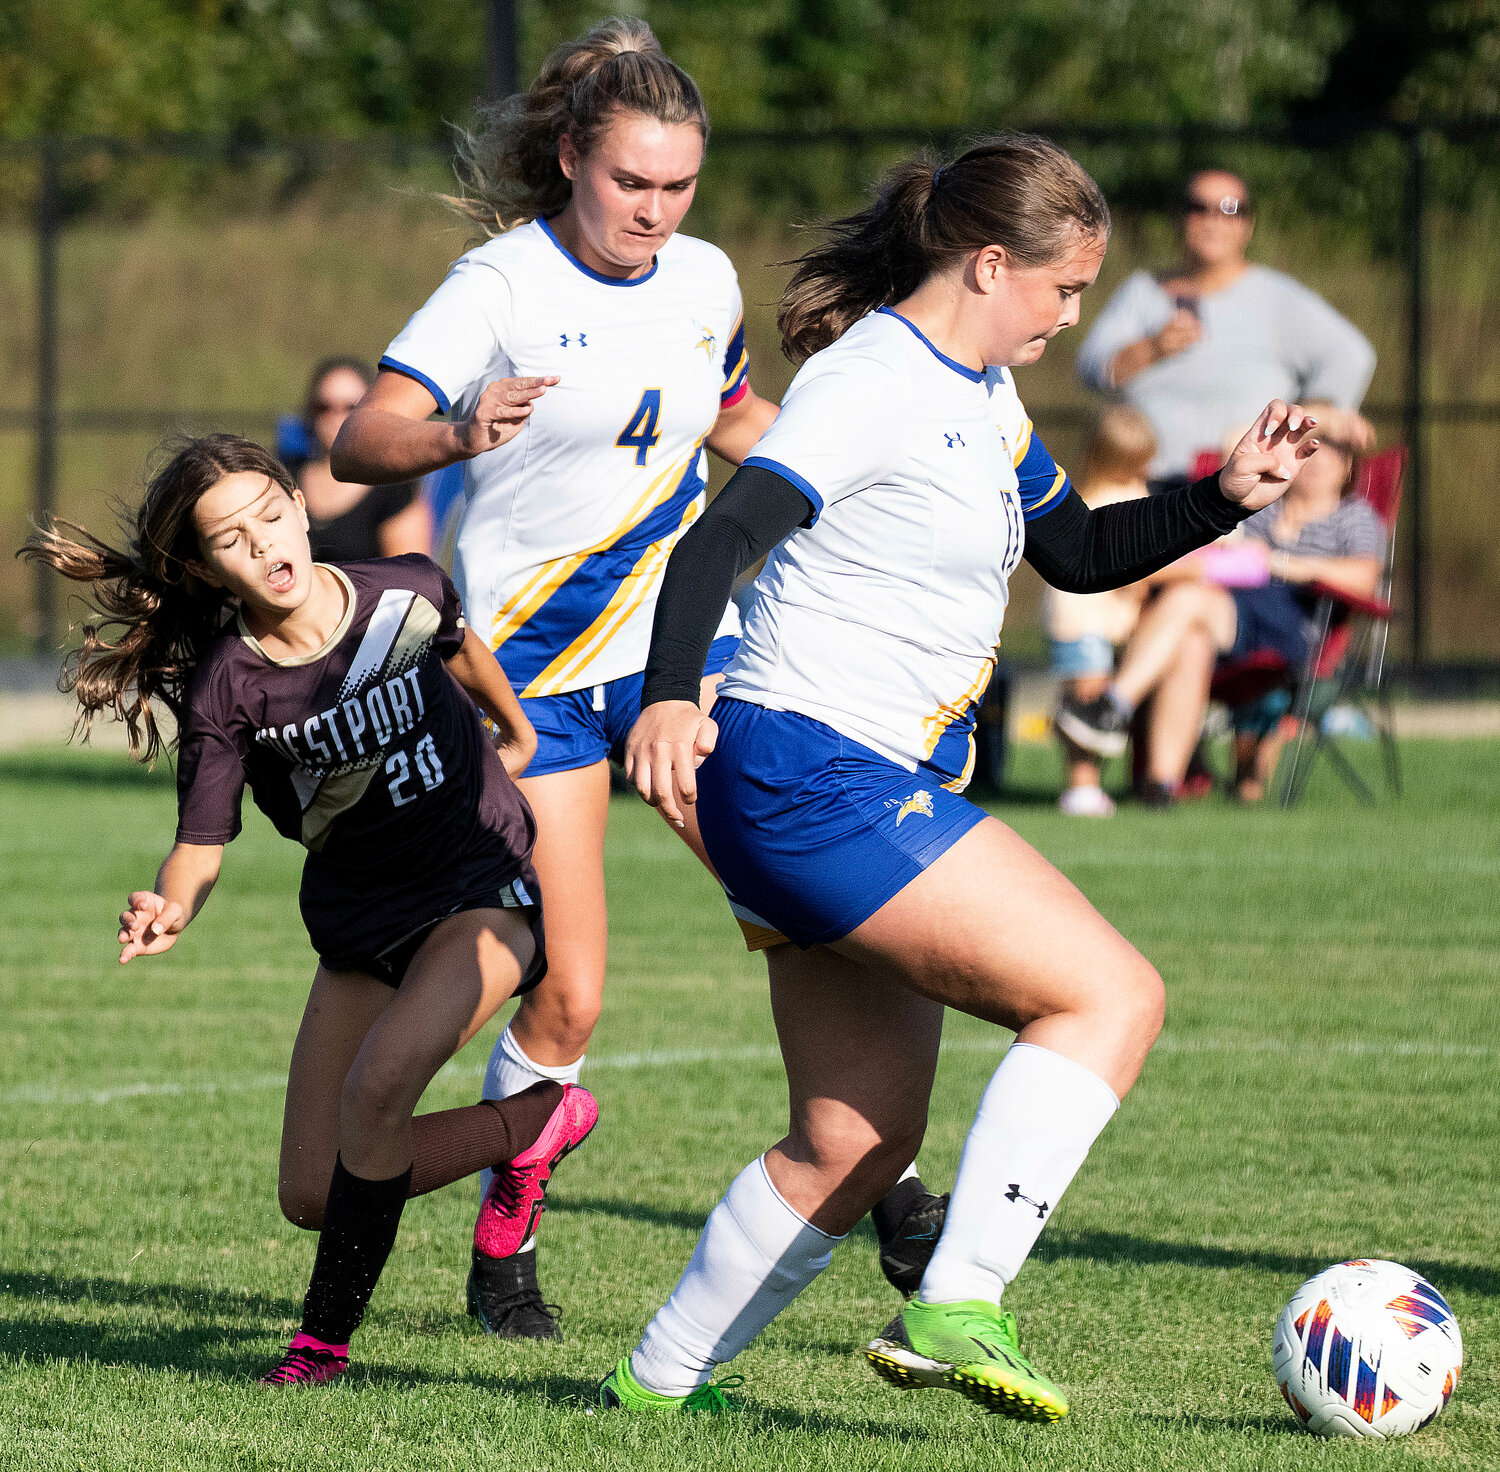 Forward Lily Veracka gets crunched by a pair of Wareham defenders. The seventh grader scored 2 goals against Wareham and leads the team with 4 goals for the season.